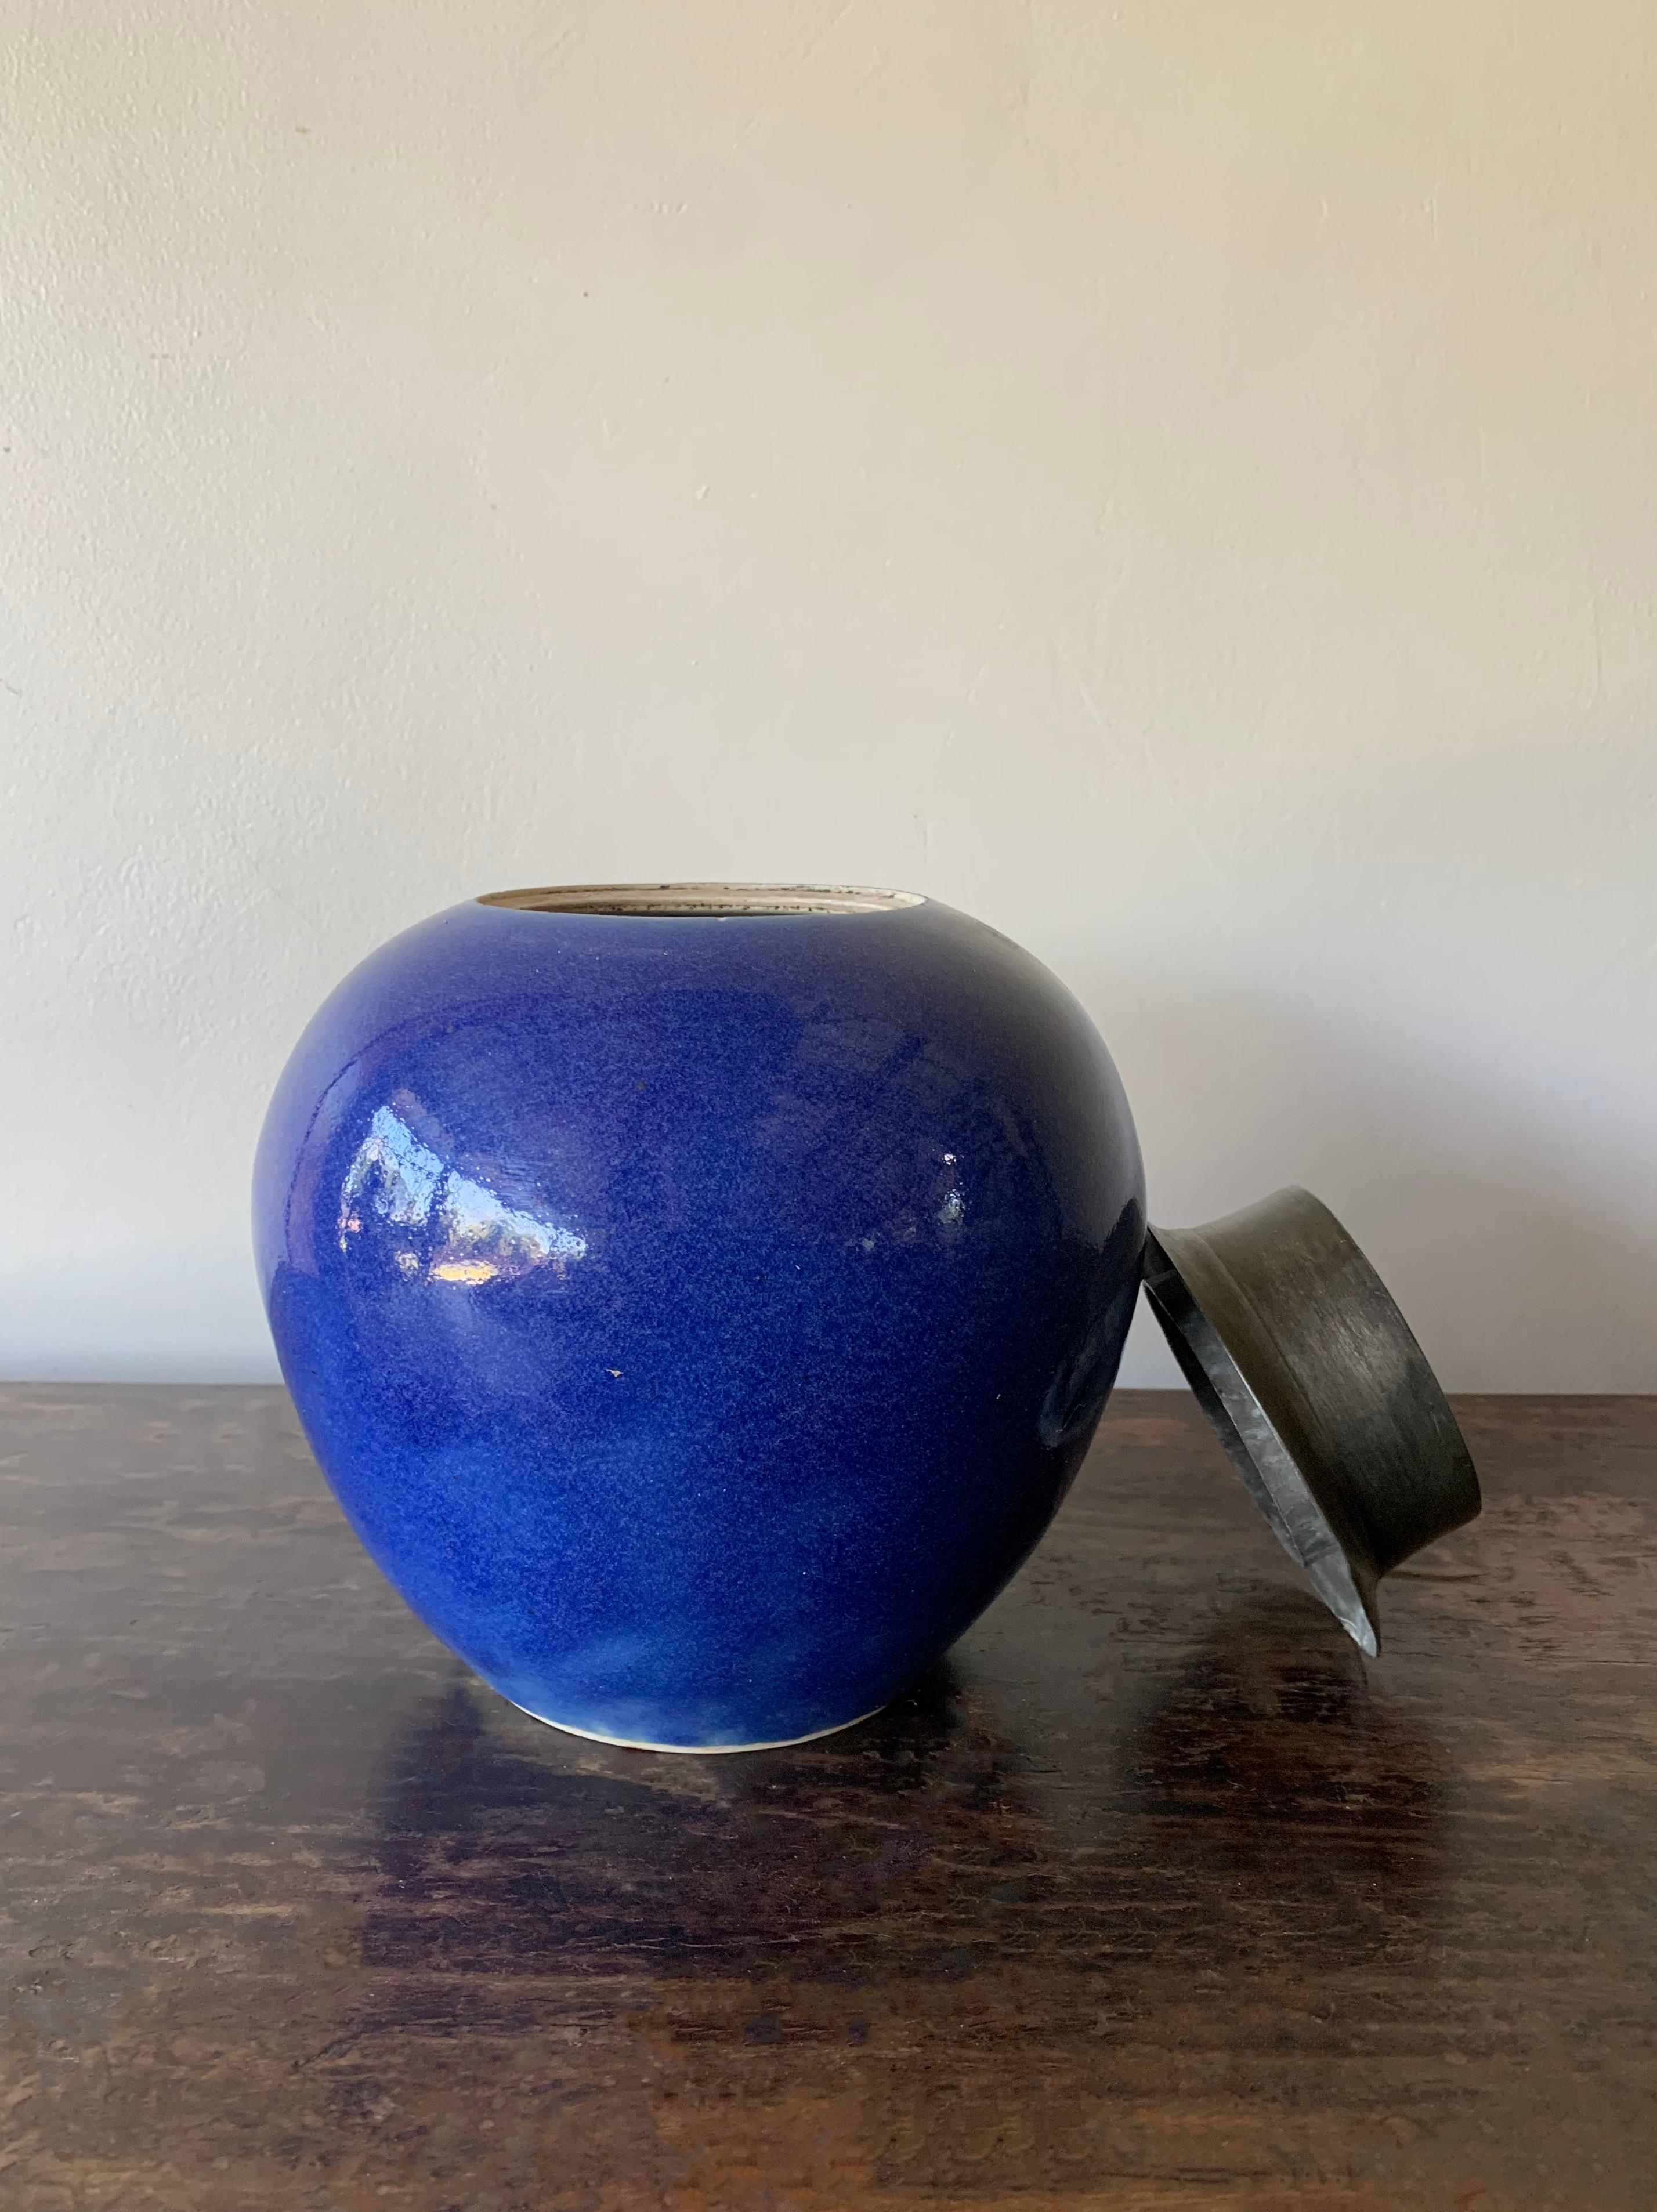 Glazed Blue Chinese Ceramic Ginger Jar with Metal Top, Early 20th Century For Sale